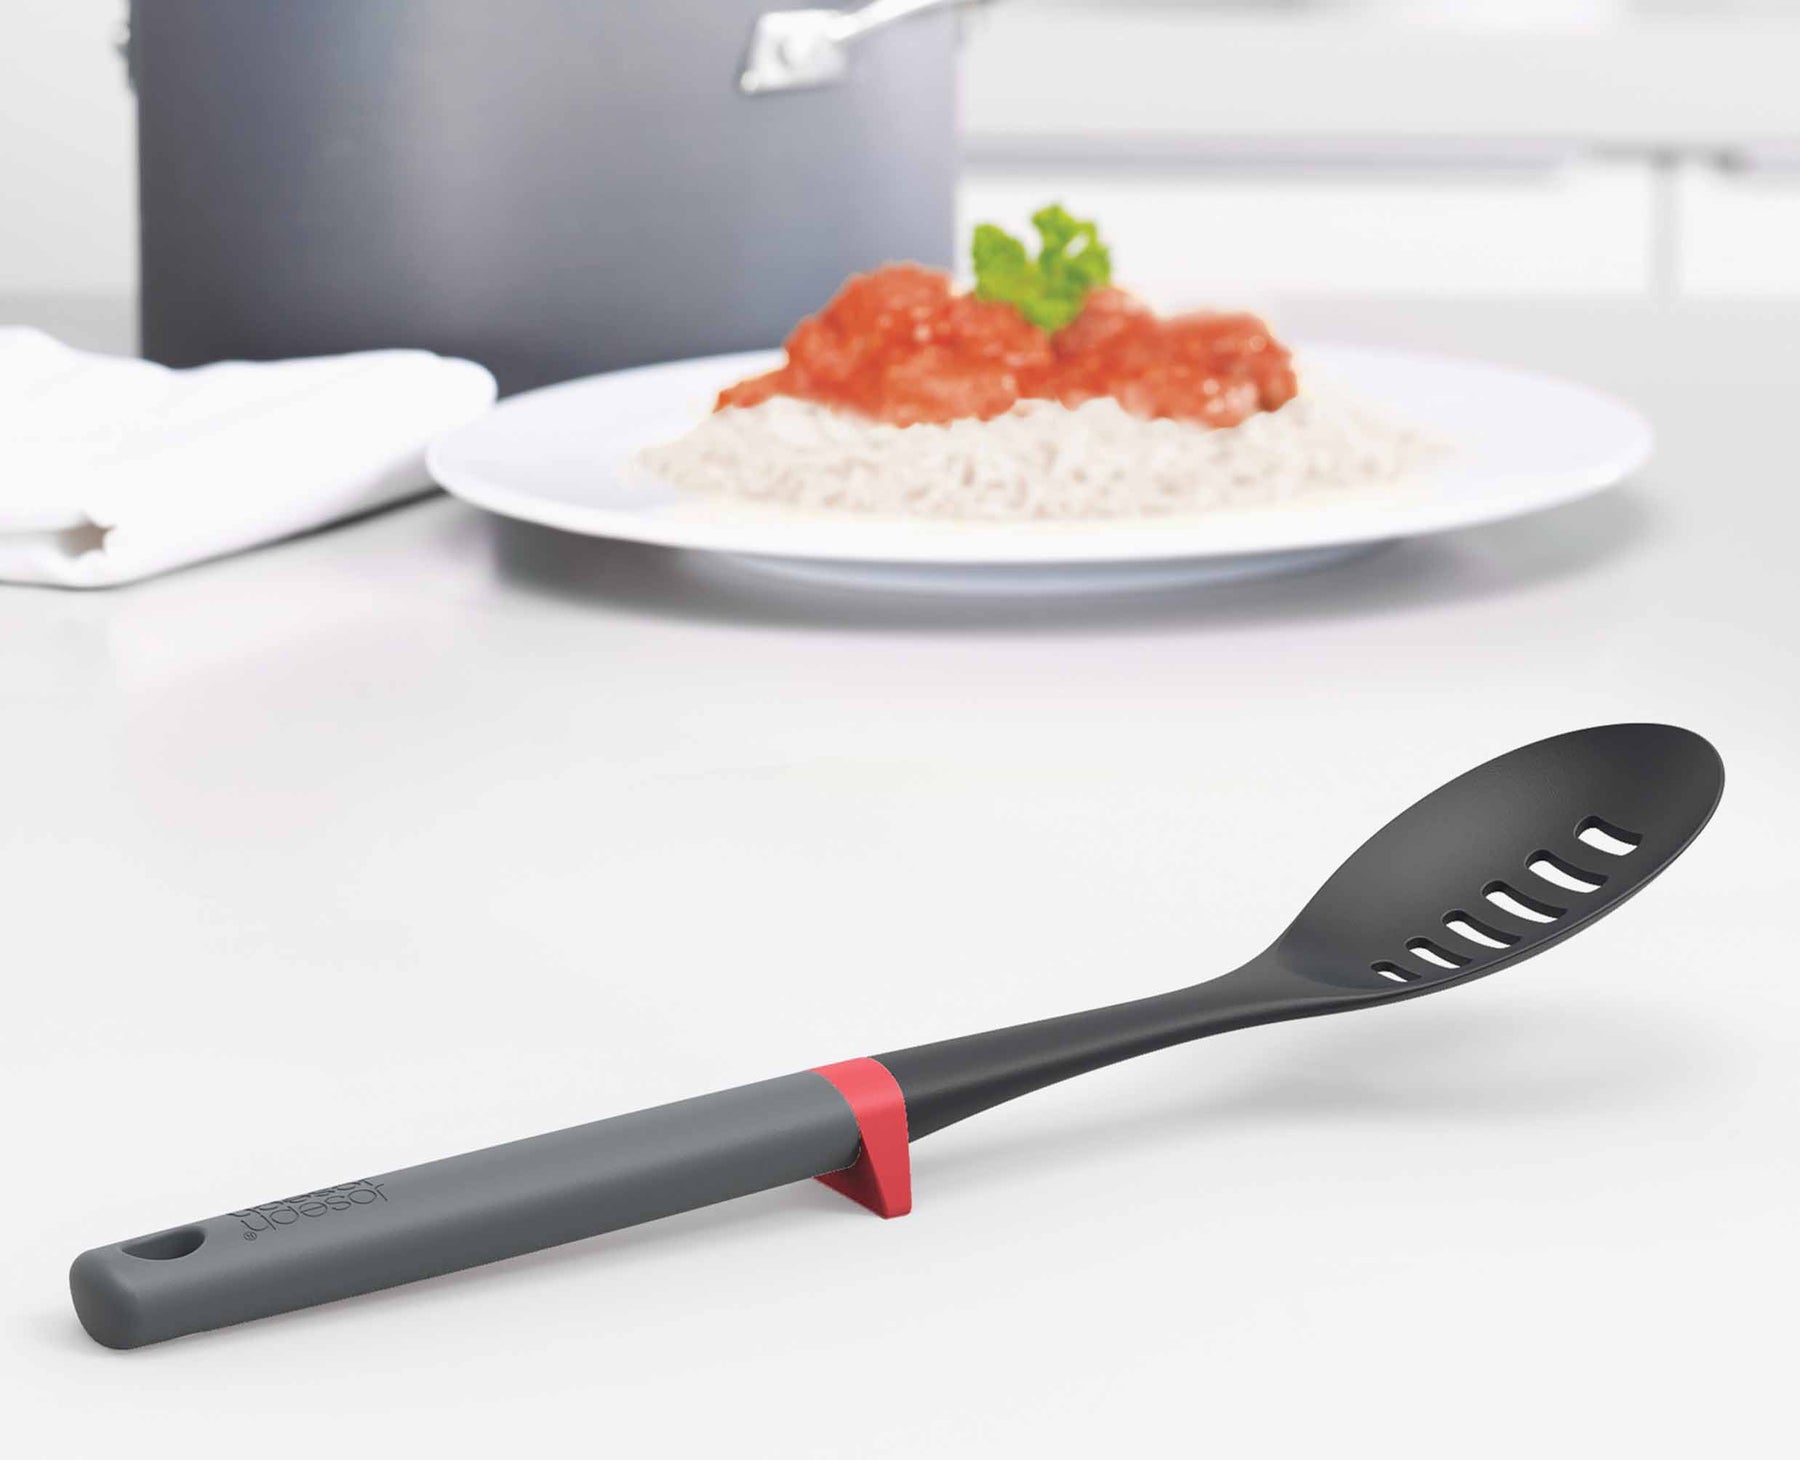 DUO Slotted Spoon